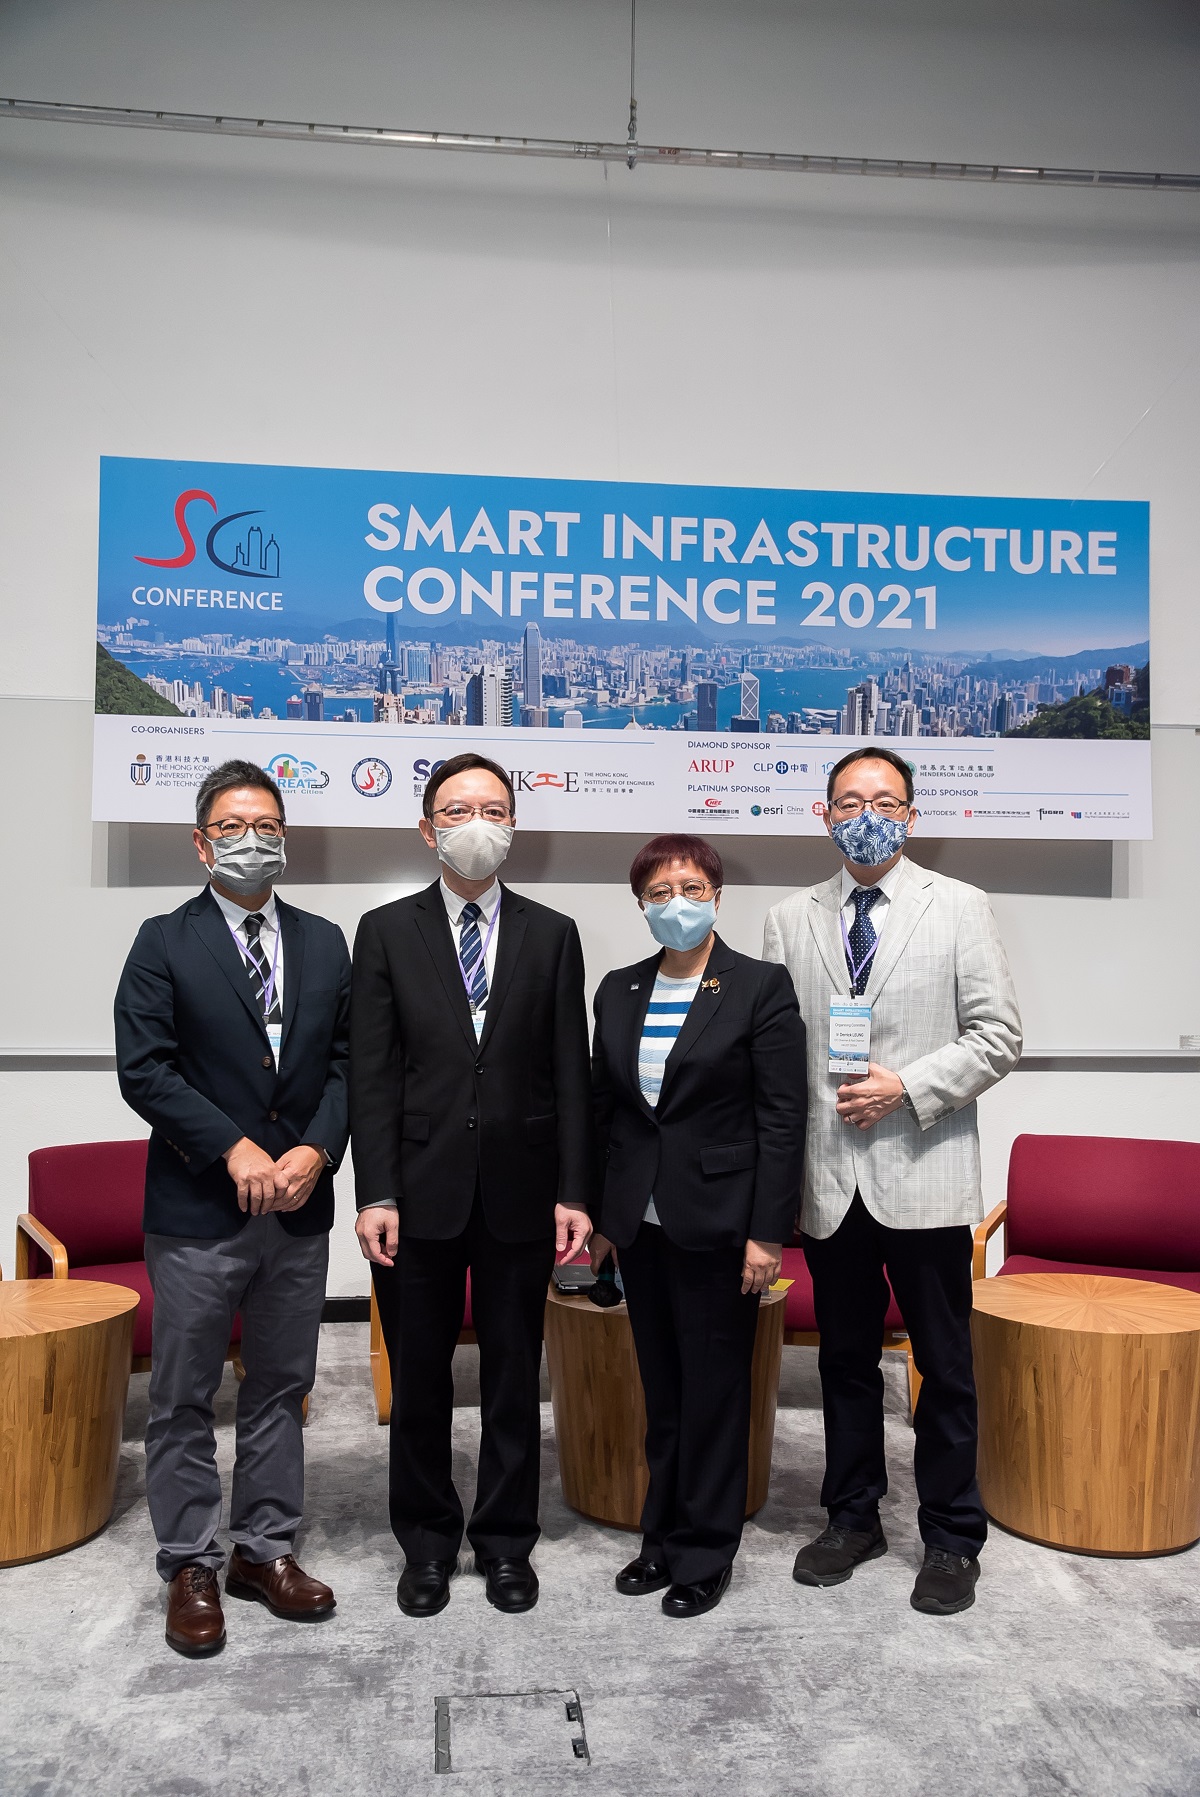 Mr. Victor Lam,  Government Chief Information Officer (second left), in group photo with Professor Hong Kam Lo, Department Head and Chair Professor of Civil and Environmental Engineering of the Hong Kong University of Science and Technology, & Director of GREAT Smart Cities Center (first left); Dr. Winnie Tang, Founder and Honorary President of Smart City Consortium (second right); and Ir. Derick Leung, Chairman of the Conference Organising Committee (first right), at the “Smart Infrastructure Conference 2021”.